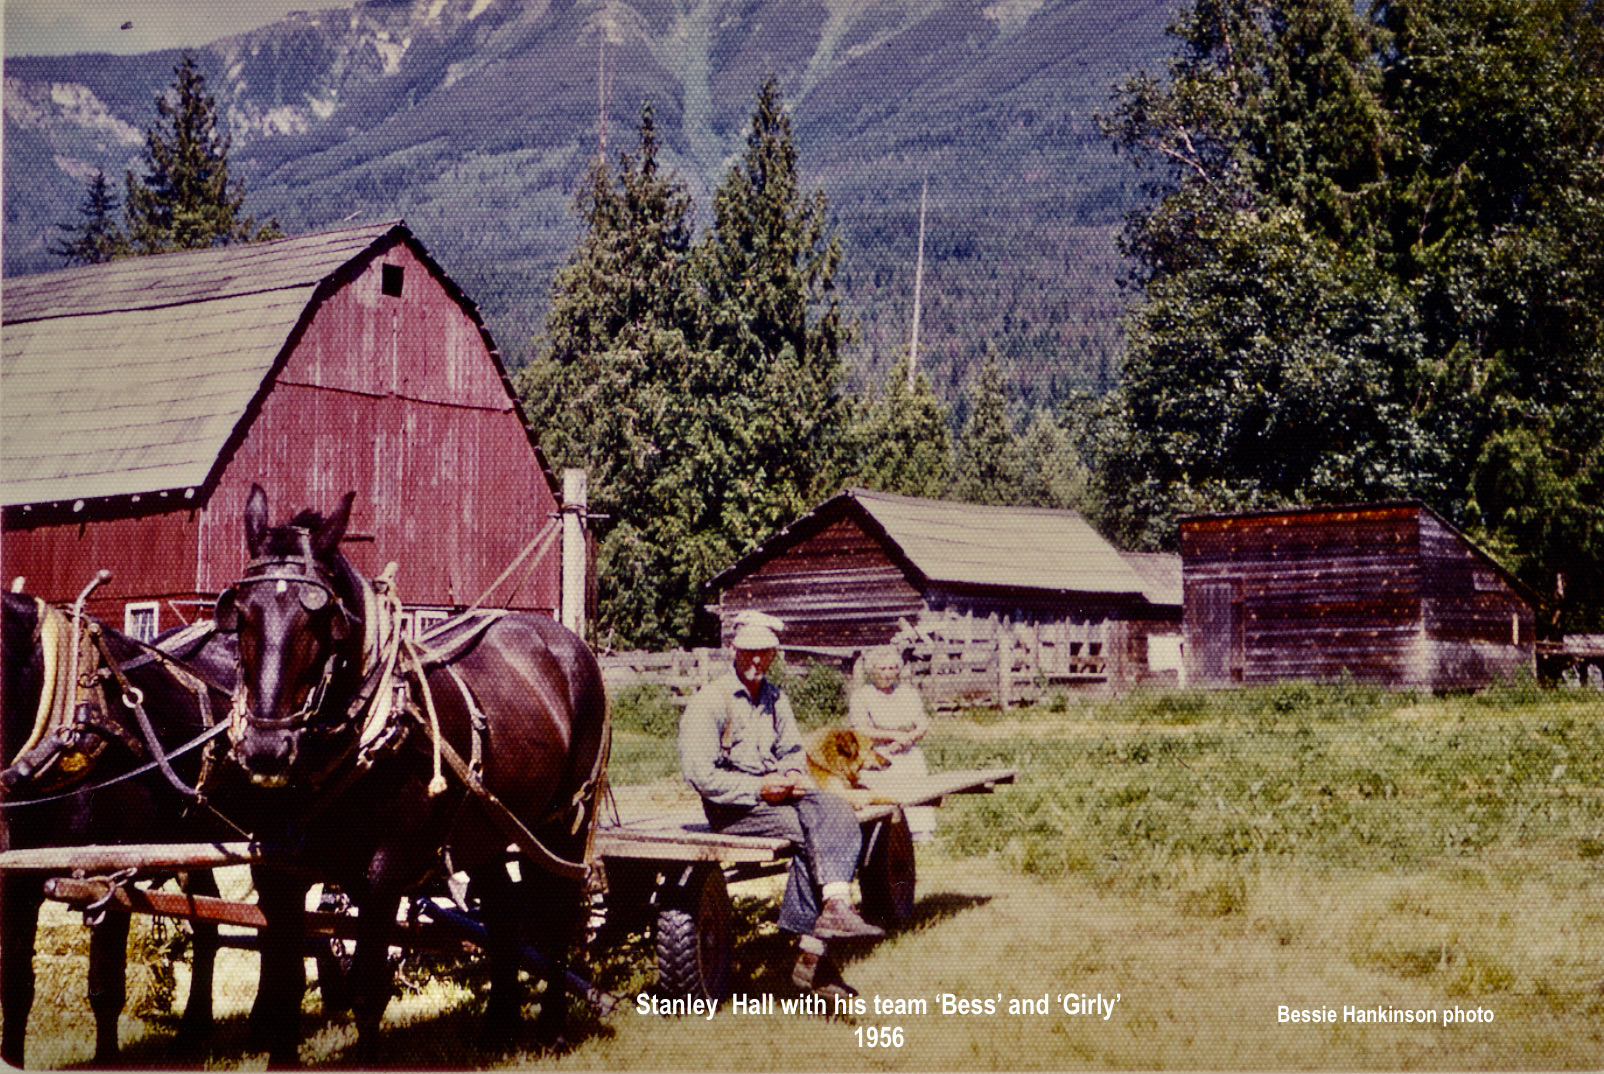 A colour photograph of a man and dog sitting on a wooden trailer attached to two black horse. A women is behind the trailer. The red barn and other farm buildings can be seen in the background.